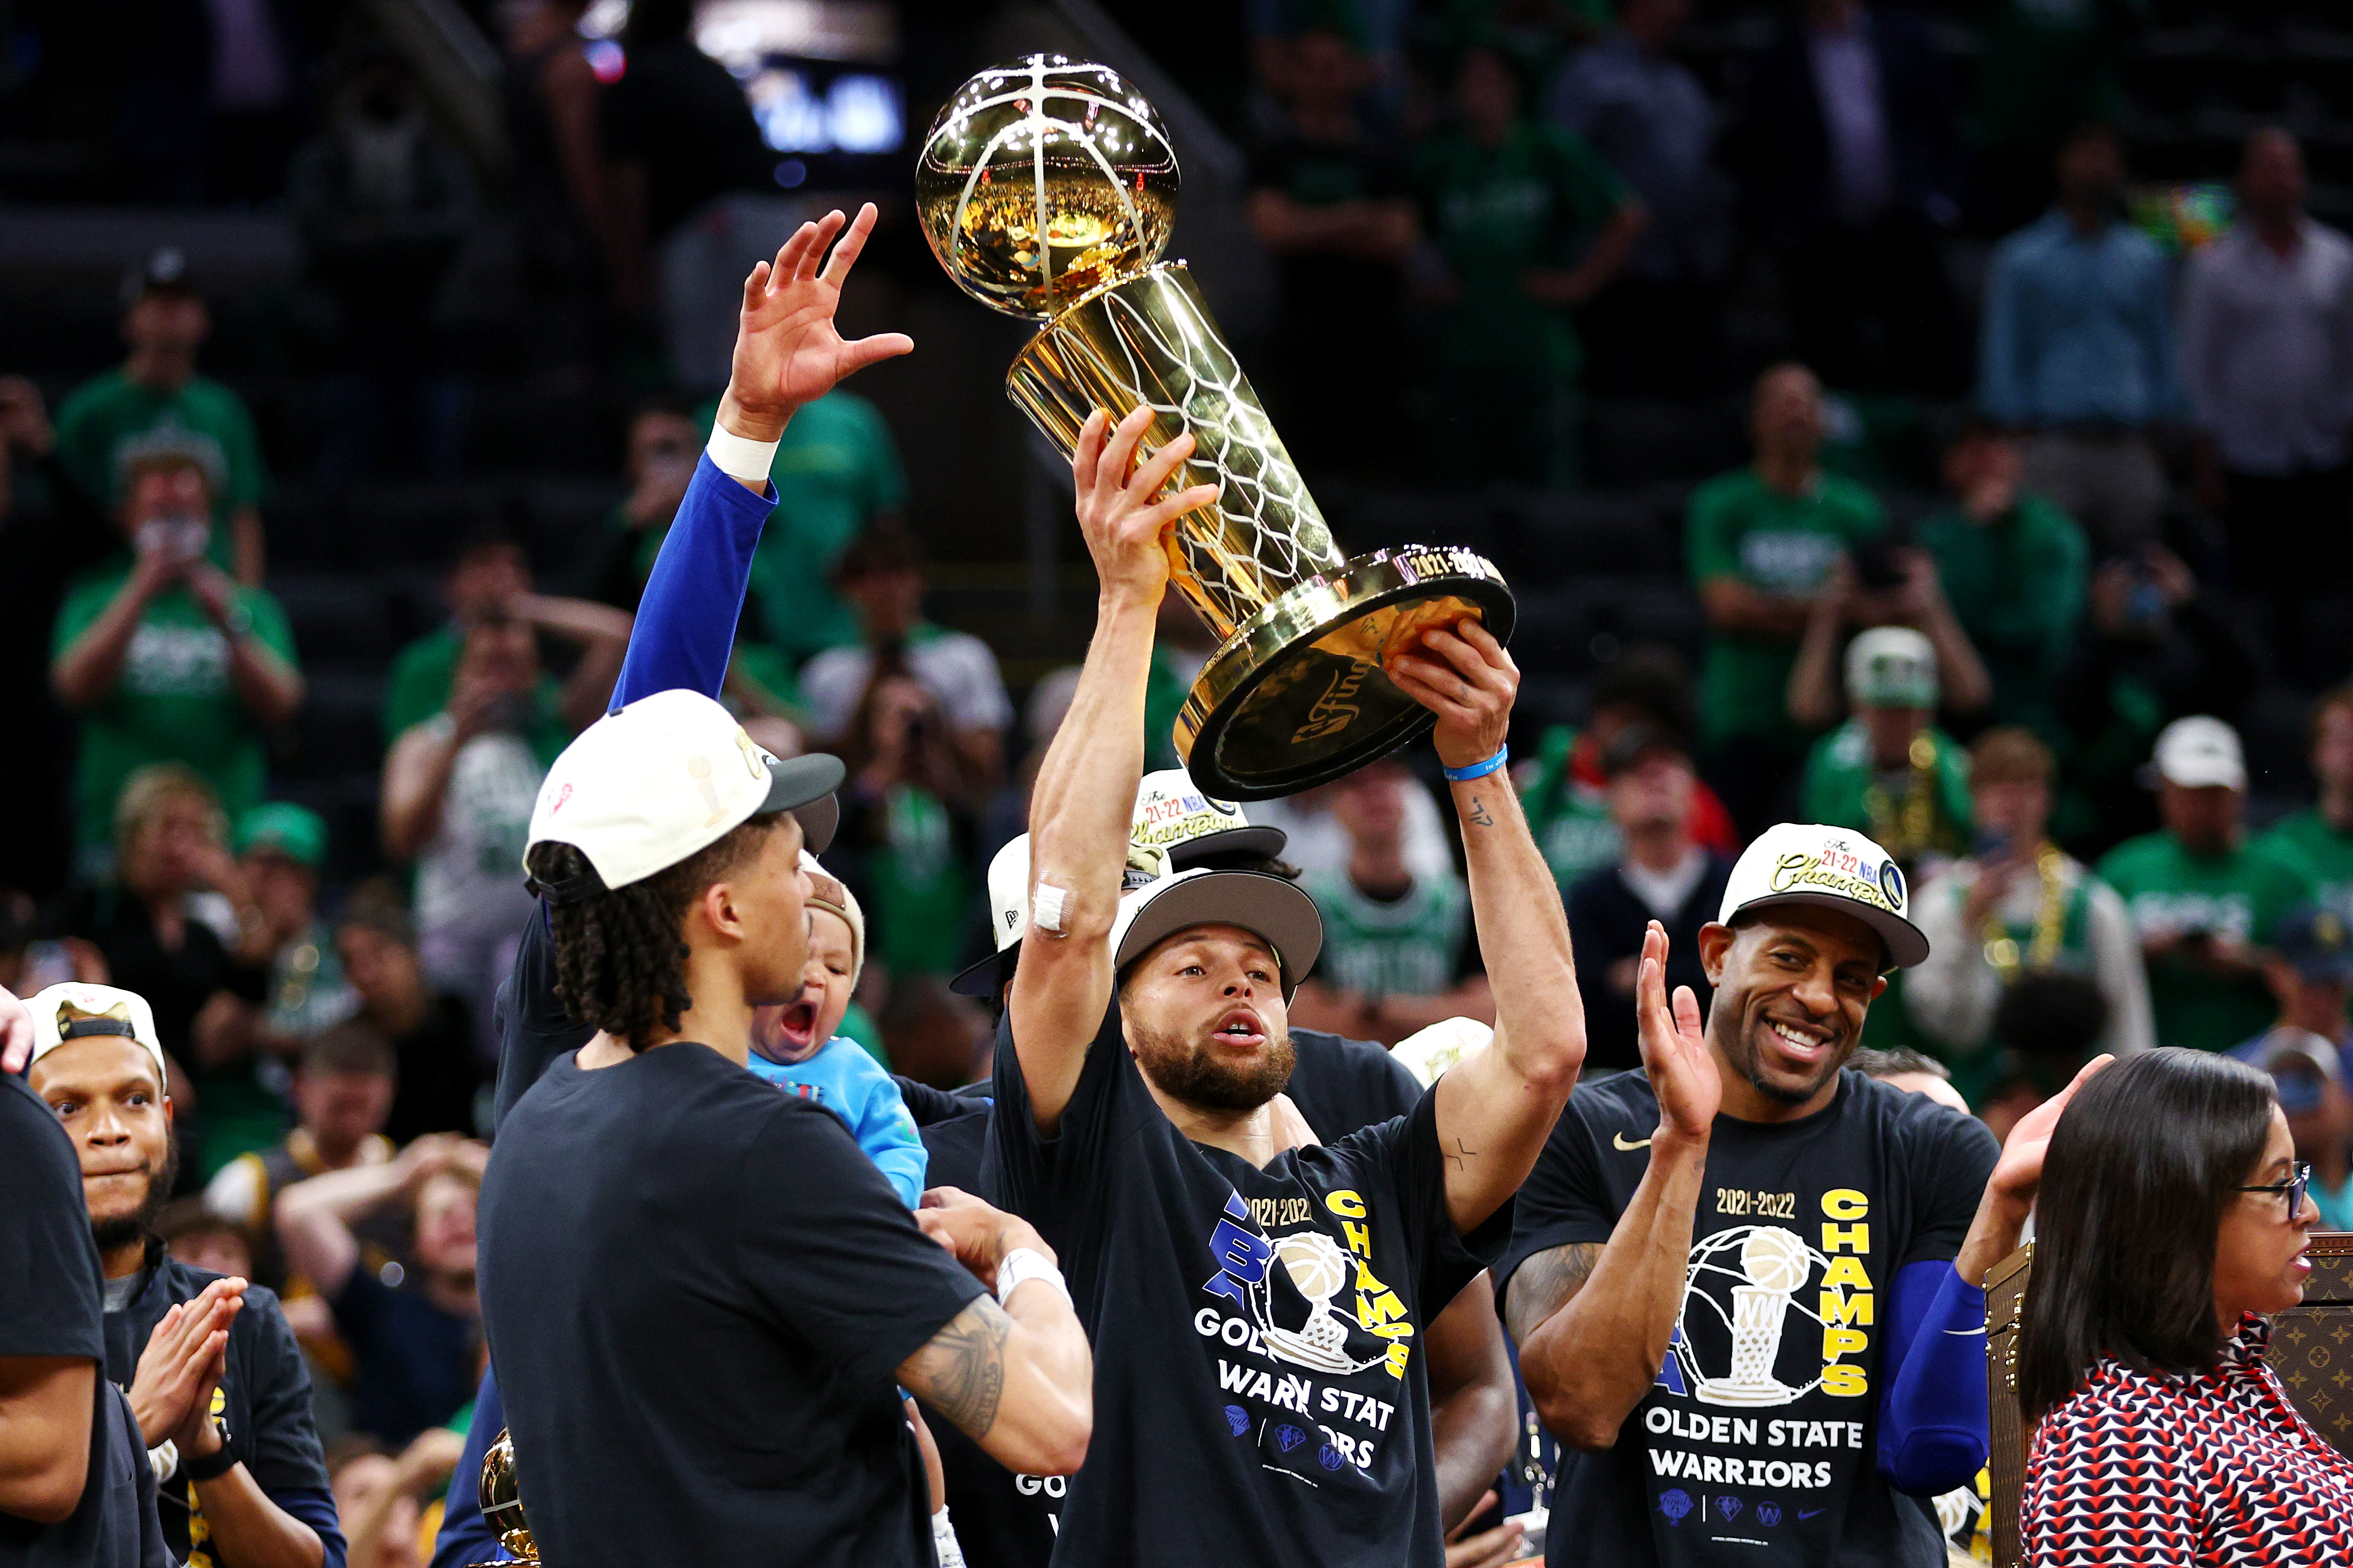 Warriors Capture 2022 NBA Championship, Stephen Curry Named Finals MVP! -  The Pine Tree